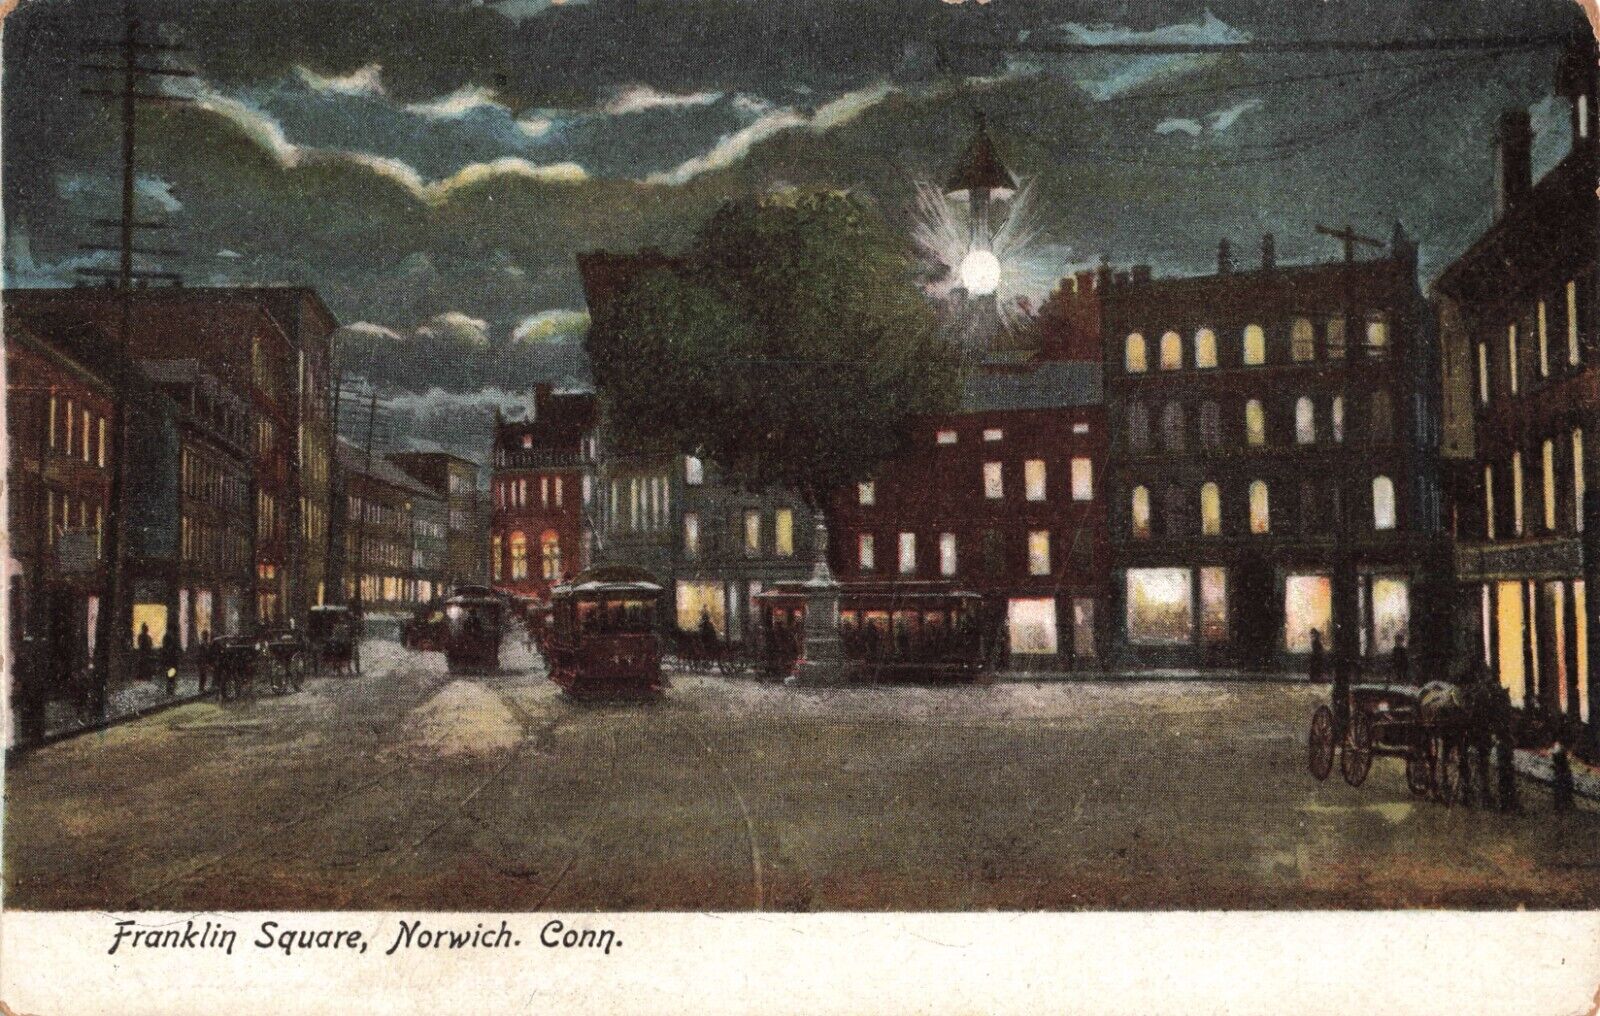 Franklin Square Norwich Conn. Night Scene Trolly Carriages c.1902 RPPC A363